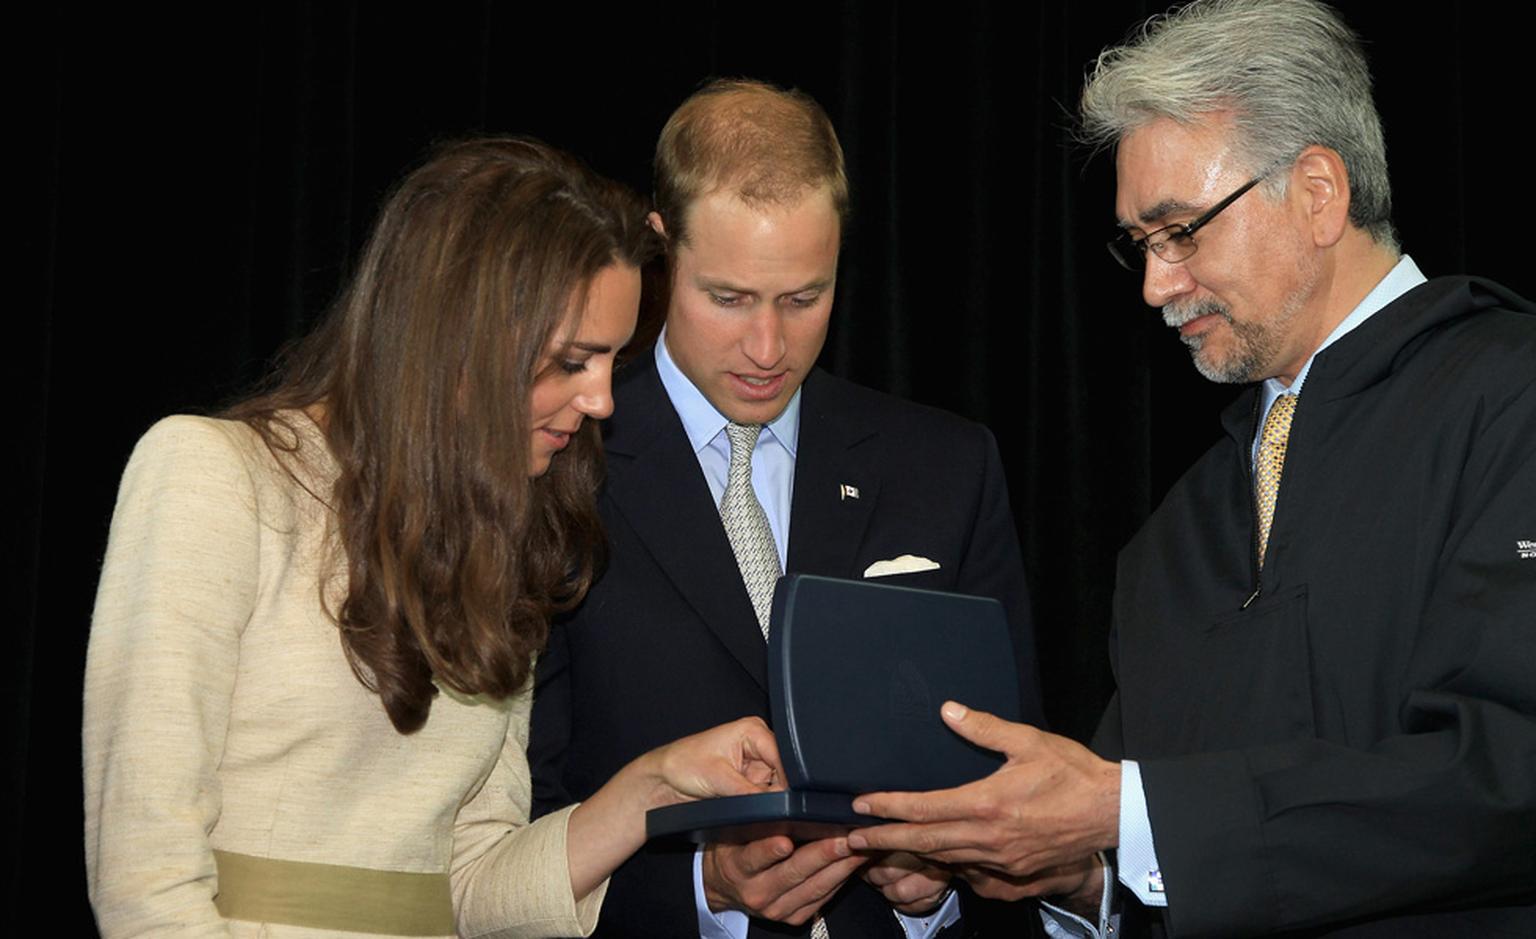 The Duke and Duchess of Cambridge are presented with diamond jewels by Northwest Territories Premier Floyd K Rowland.